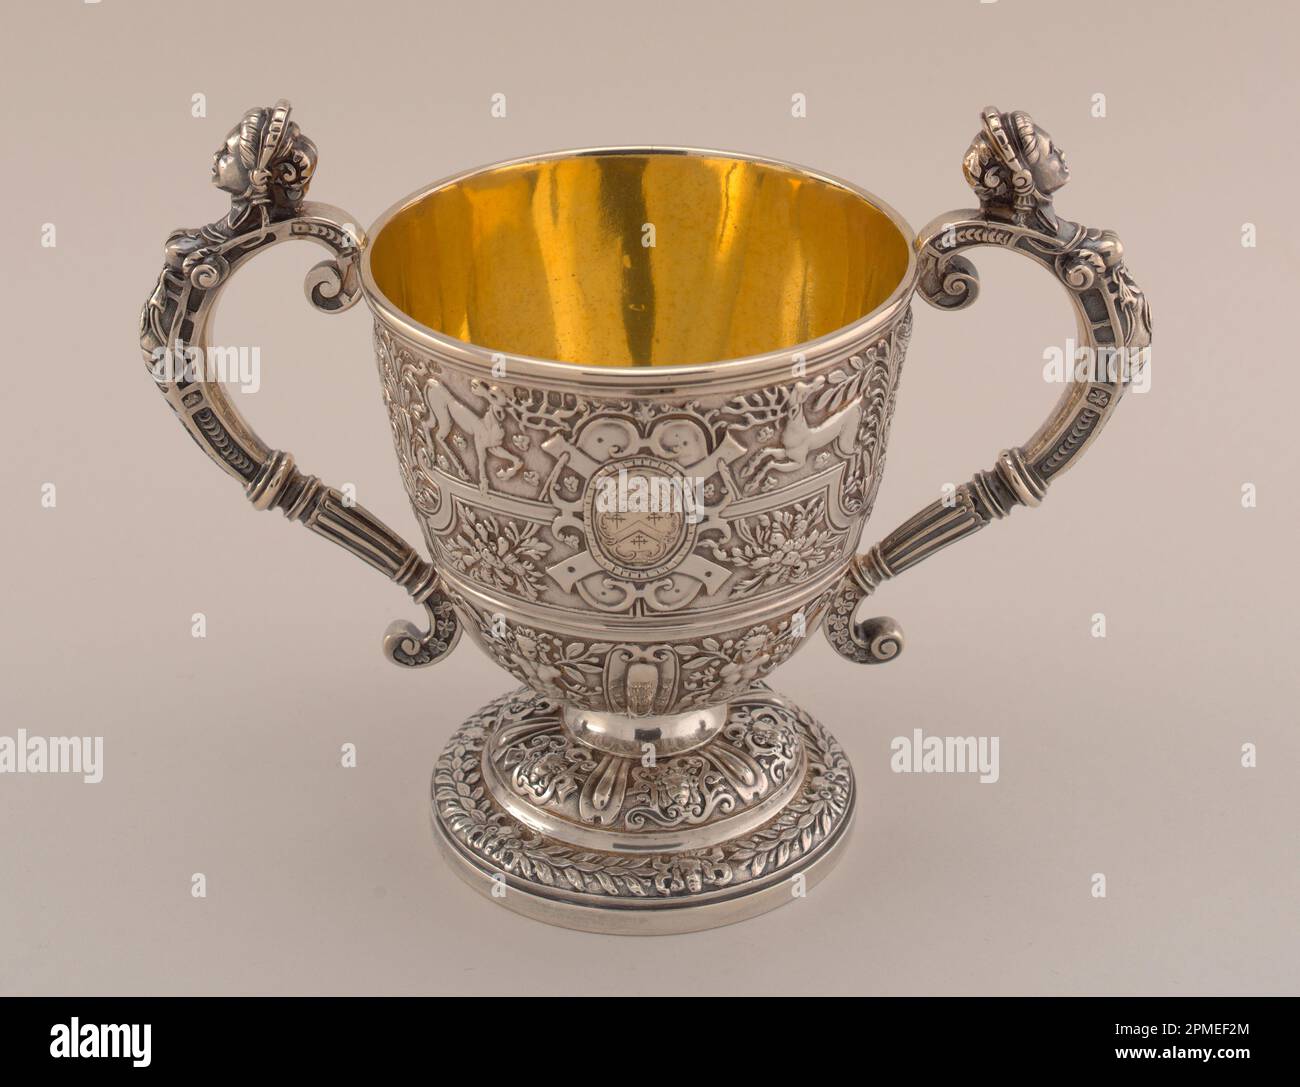 Two-handled Cup; silver; Overall: 16.5 x 21 x 11.3 cm (6 1/2 x 8 1/4 x 4 7/16 in.) Stock Photo